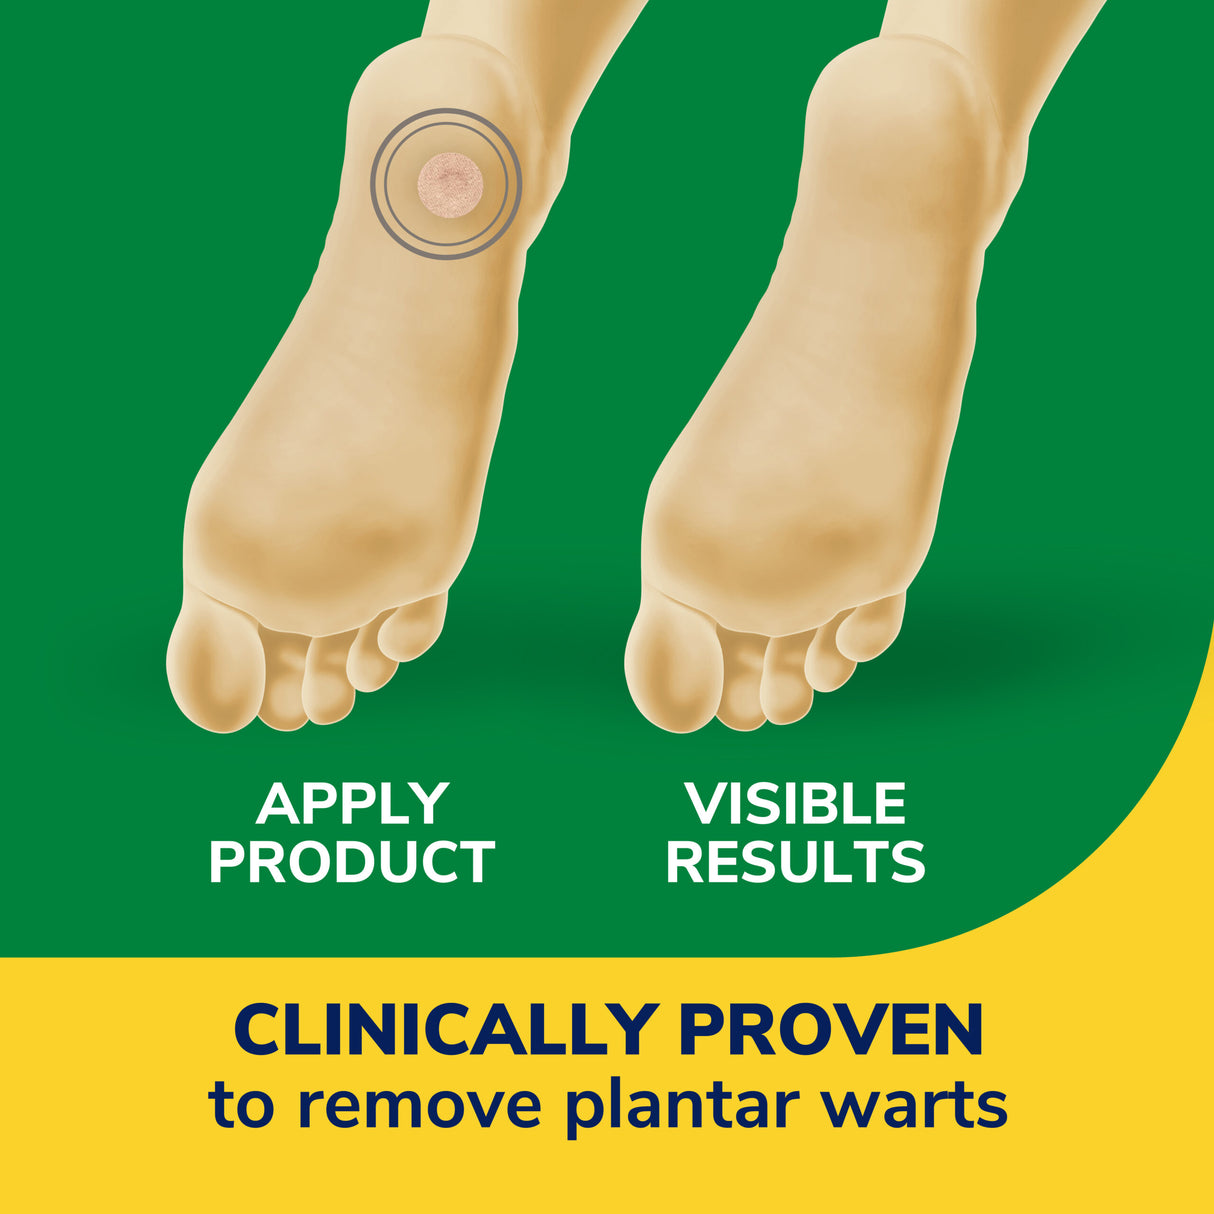 image of clinically proven to remove plantar warts